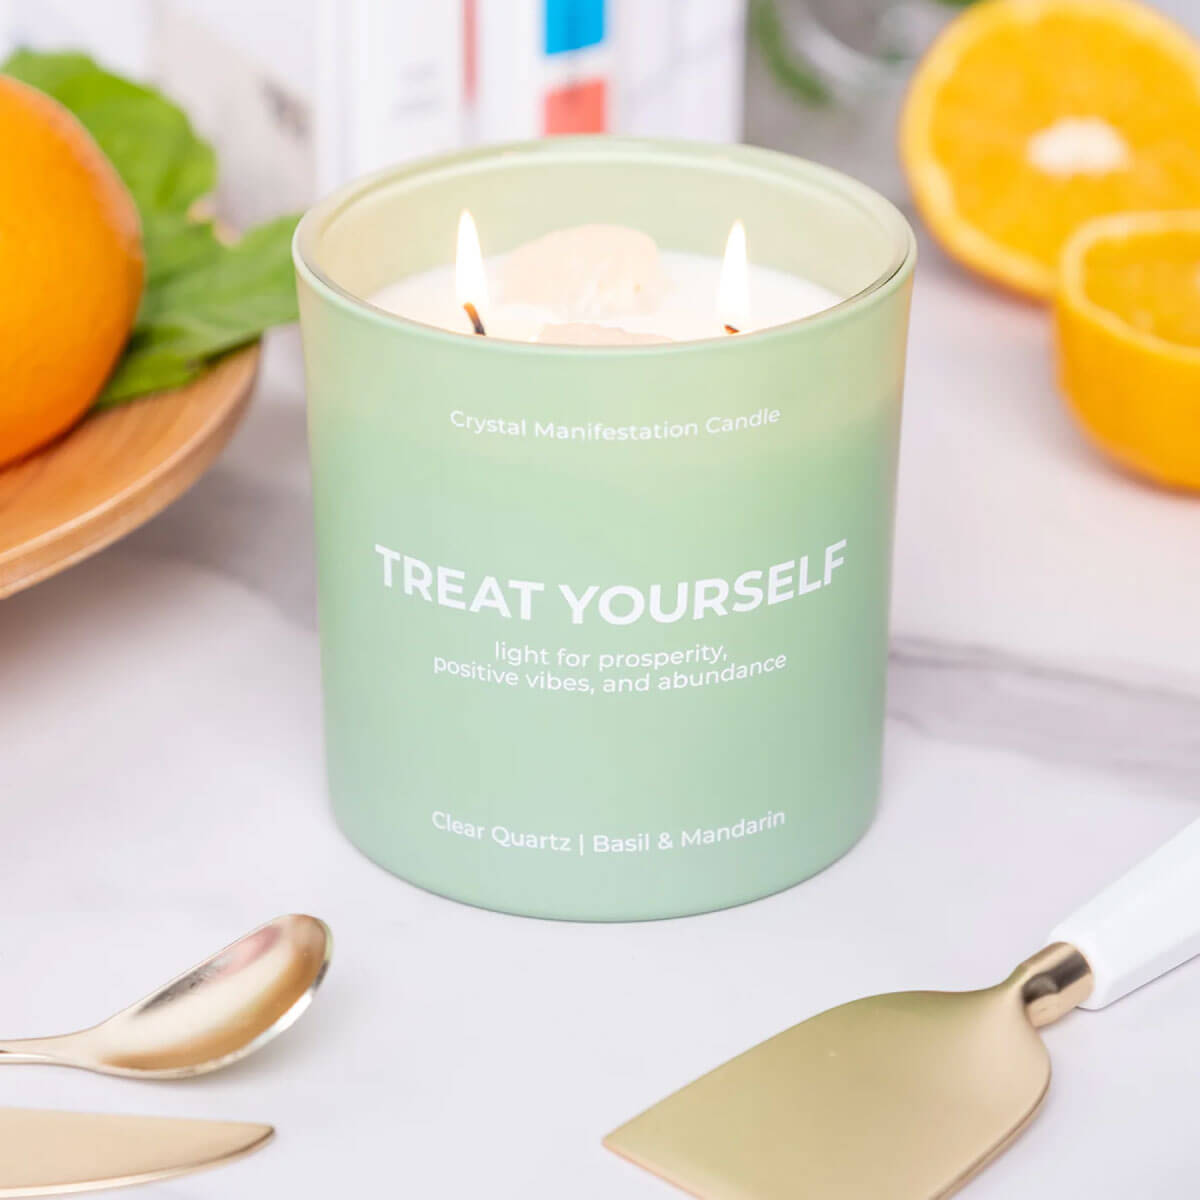 Jill & Ally Treat Yourself Crystal Manifestation Candle green front | MILK MONEY milkmoney.co | cute gifts for women